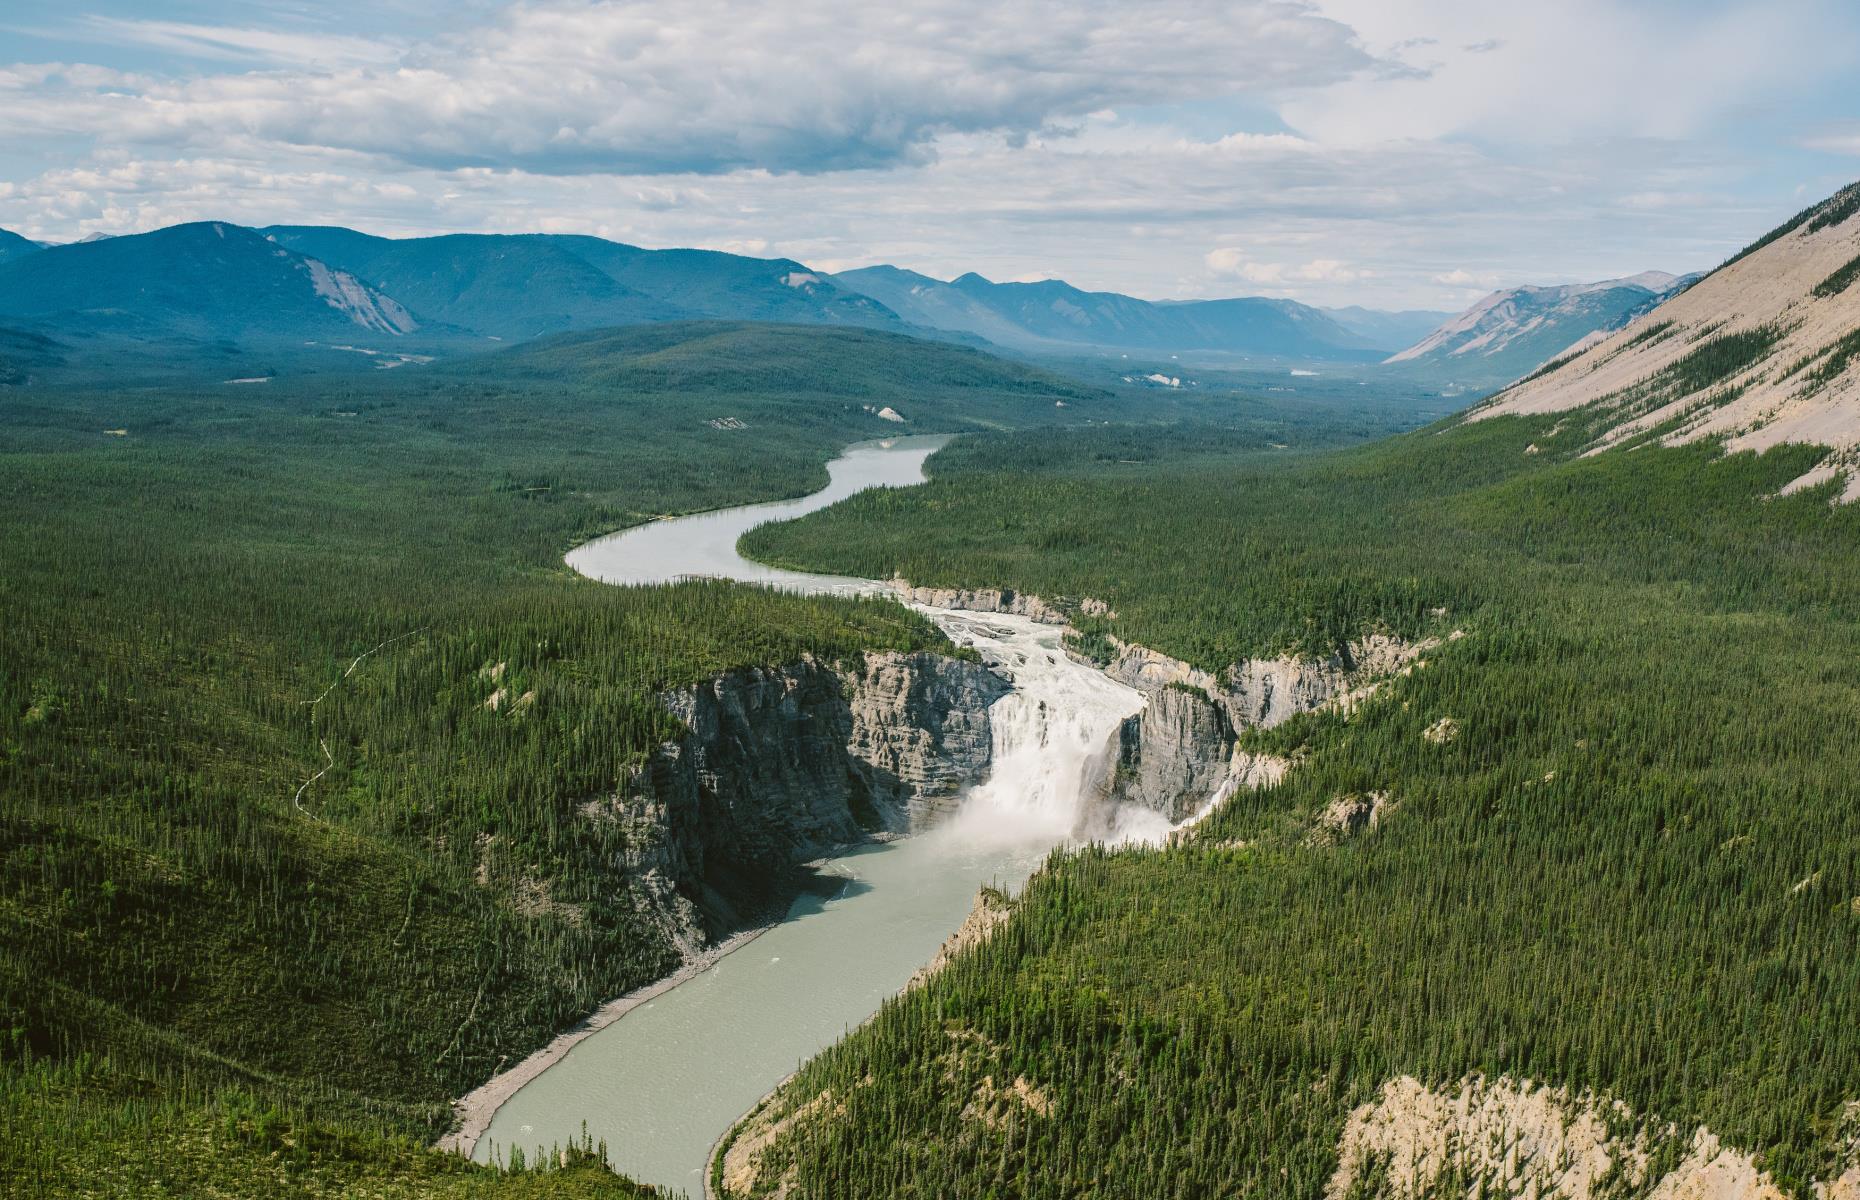 <p><a href="http://parks.canada.ca/pn-np/nt/nahanni">Nahanni National Park Reserve</a> sits on the South Nahanni River alongside Nááts'įhch'oh, its sister park reserve. Even though the parks sit side-by-side, they each have their own flavor. Nahanni’s greatest claim to fame beyond the river itself is the Cirque of the Unclimbables, a collection of granite spires, as well as Náįlįcho (Virginia Falls), a gorgeous waterfall that's twice as high as the famed Niagara Falls.</p>  <p><a href="https://www.loveexploring.com/galleries/146408/canadas-most-famous-attractions-and-their-secrets?page=1"><strong>Canada's most famous attractions and their secrets</strong></a></p>